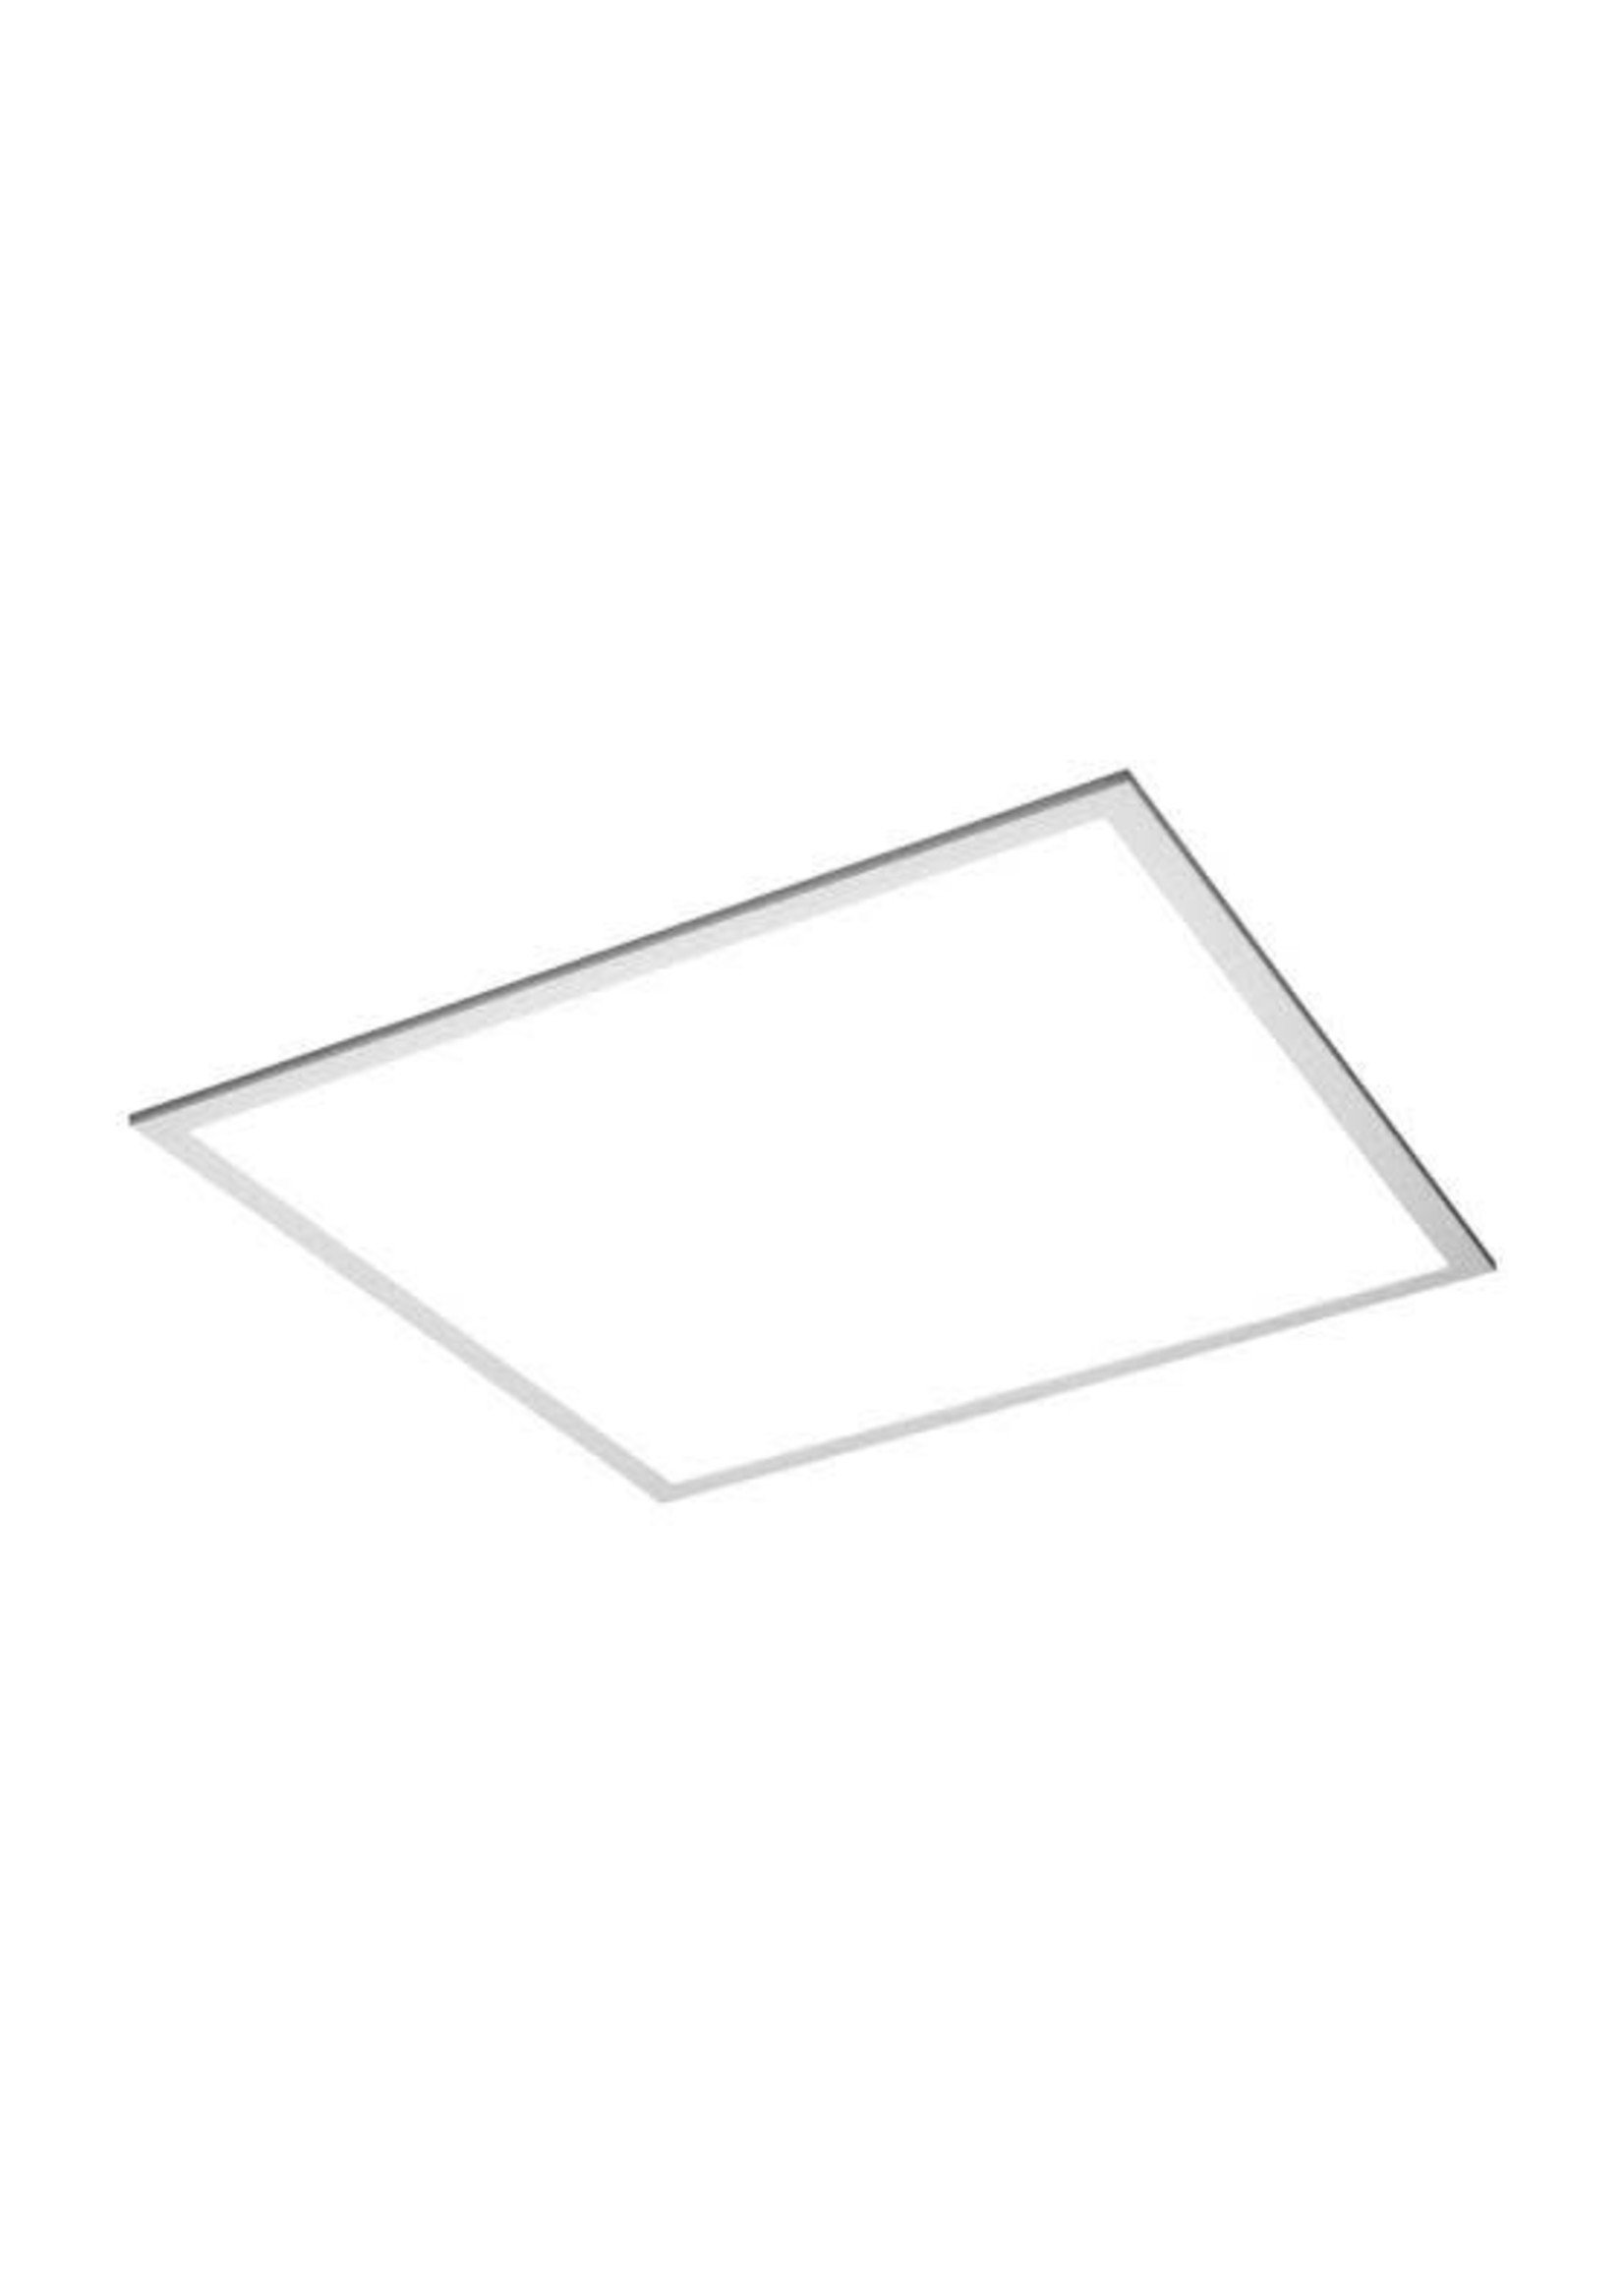 NUVO SATCO 2X2 LED BACKLIT FLAT PANEL SELECTABLE CCT (65-571)